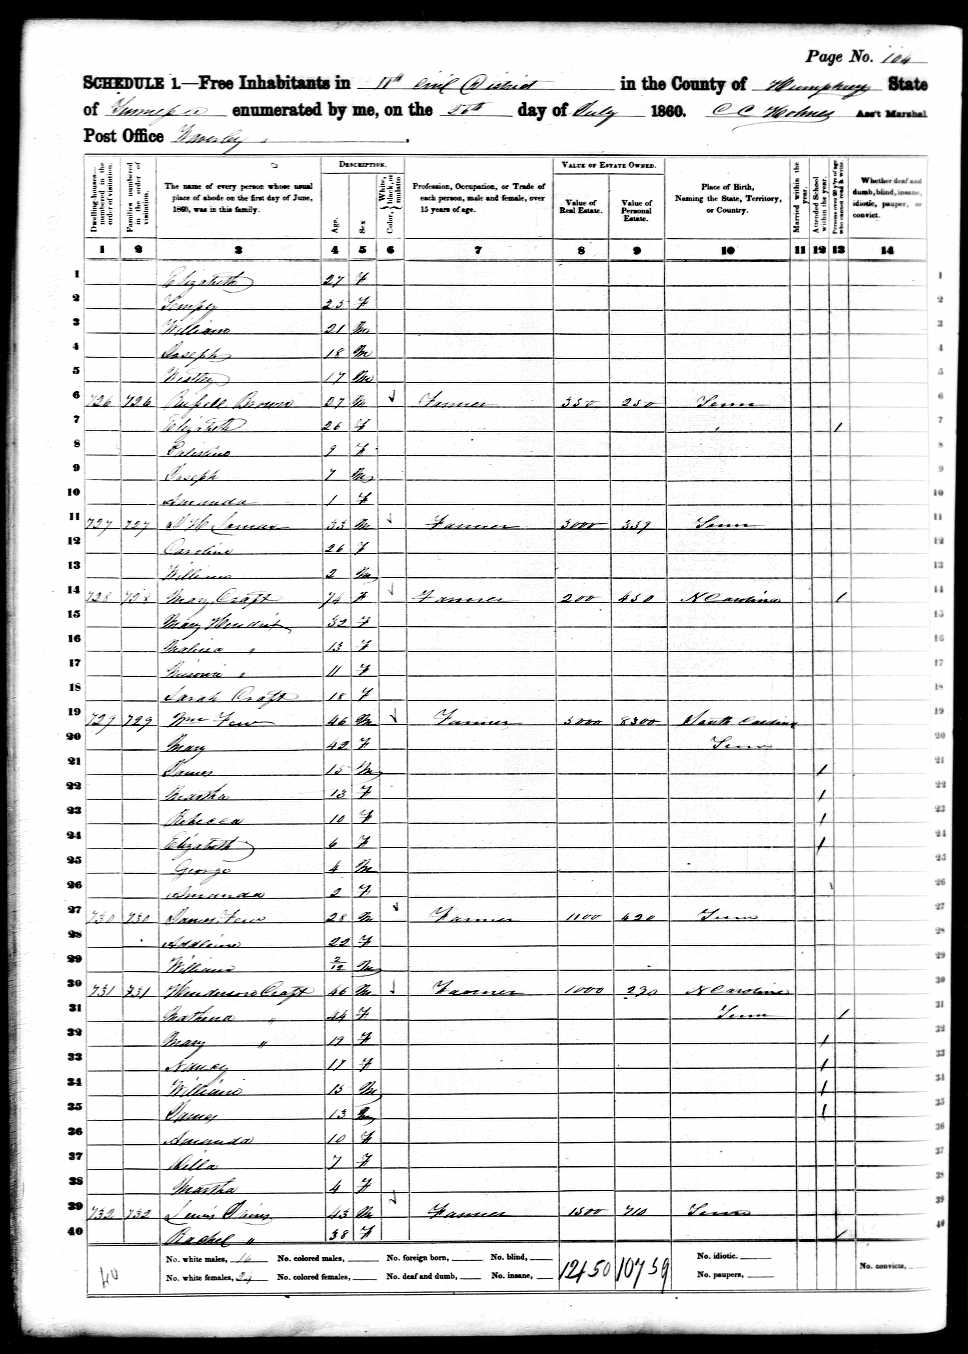 Lewis Evans and wife Rachael Brazzell, 1860 Humphreys County, Tennessee, census